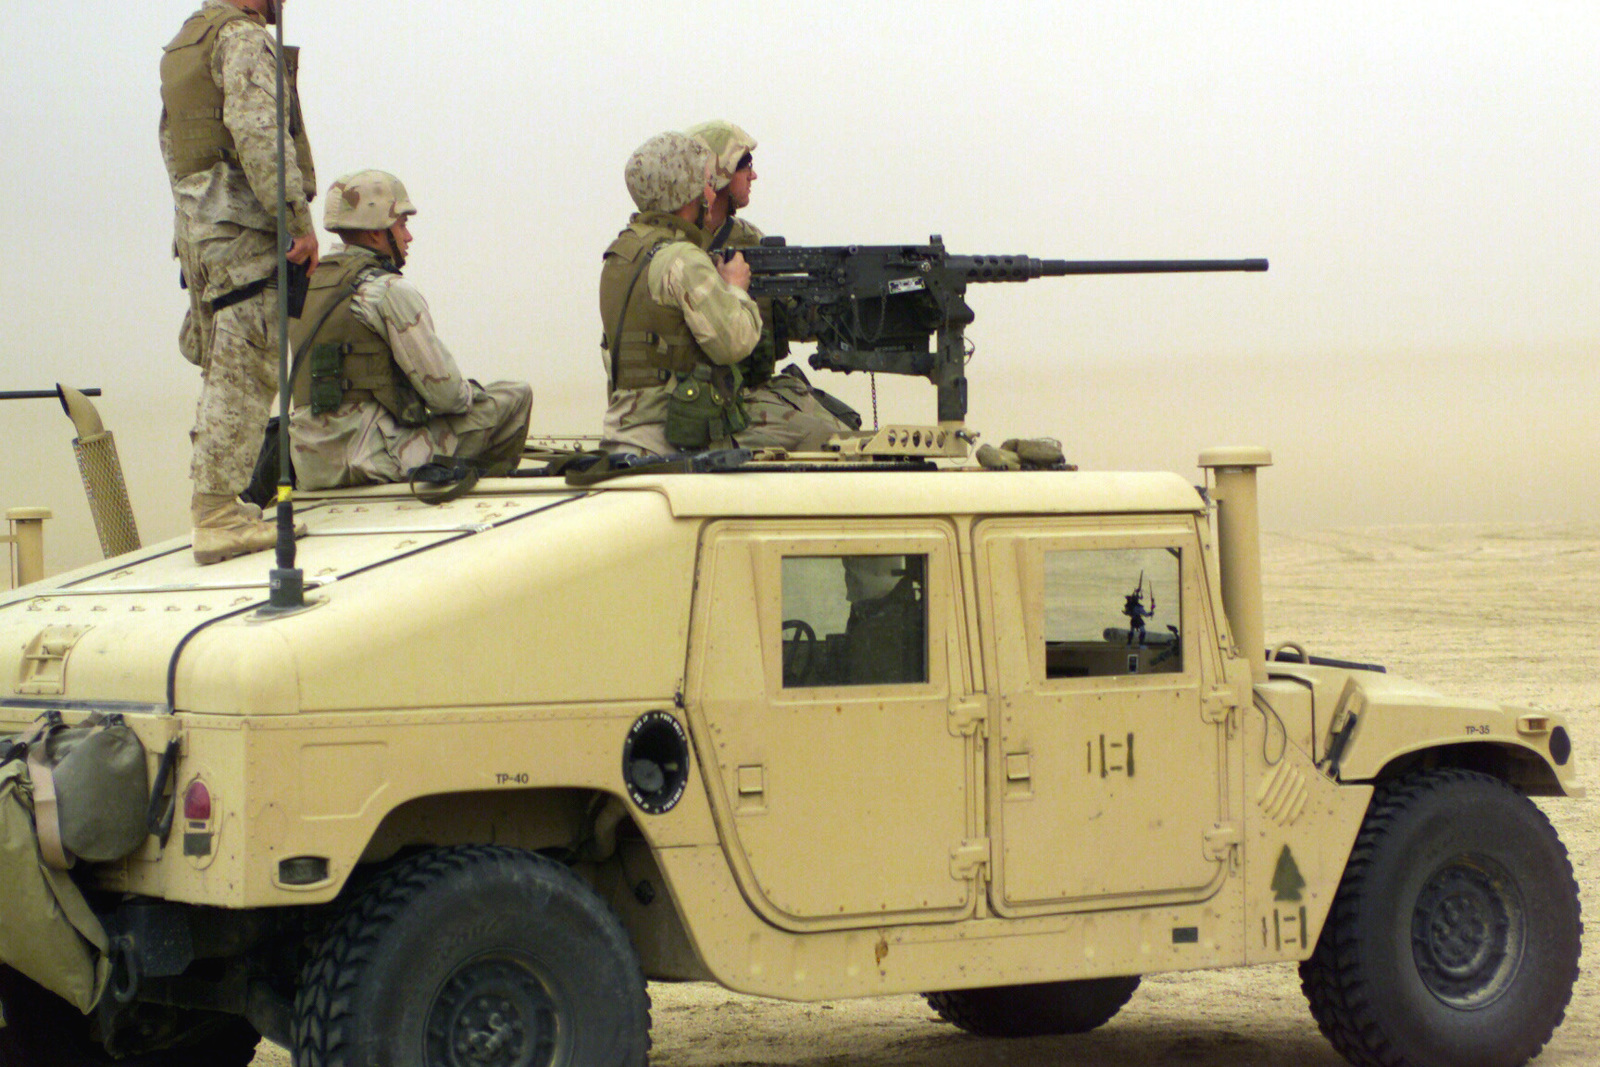 From The M1043 High Mobility Multipurpose Wheeled Vehicle Hmmwv A Marine With 1st Tank Battalion Twentynine